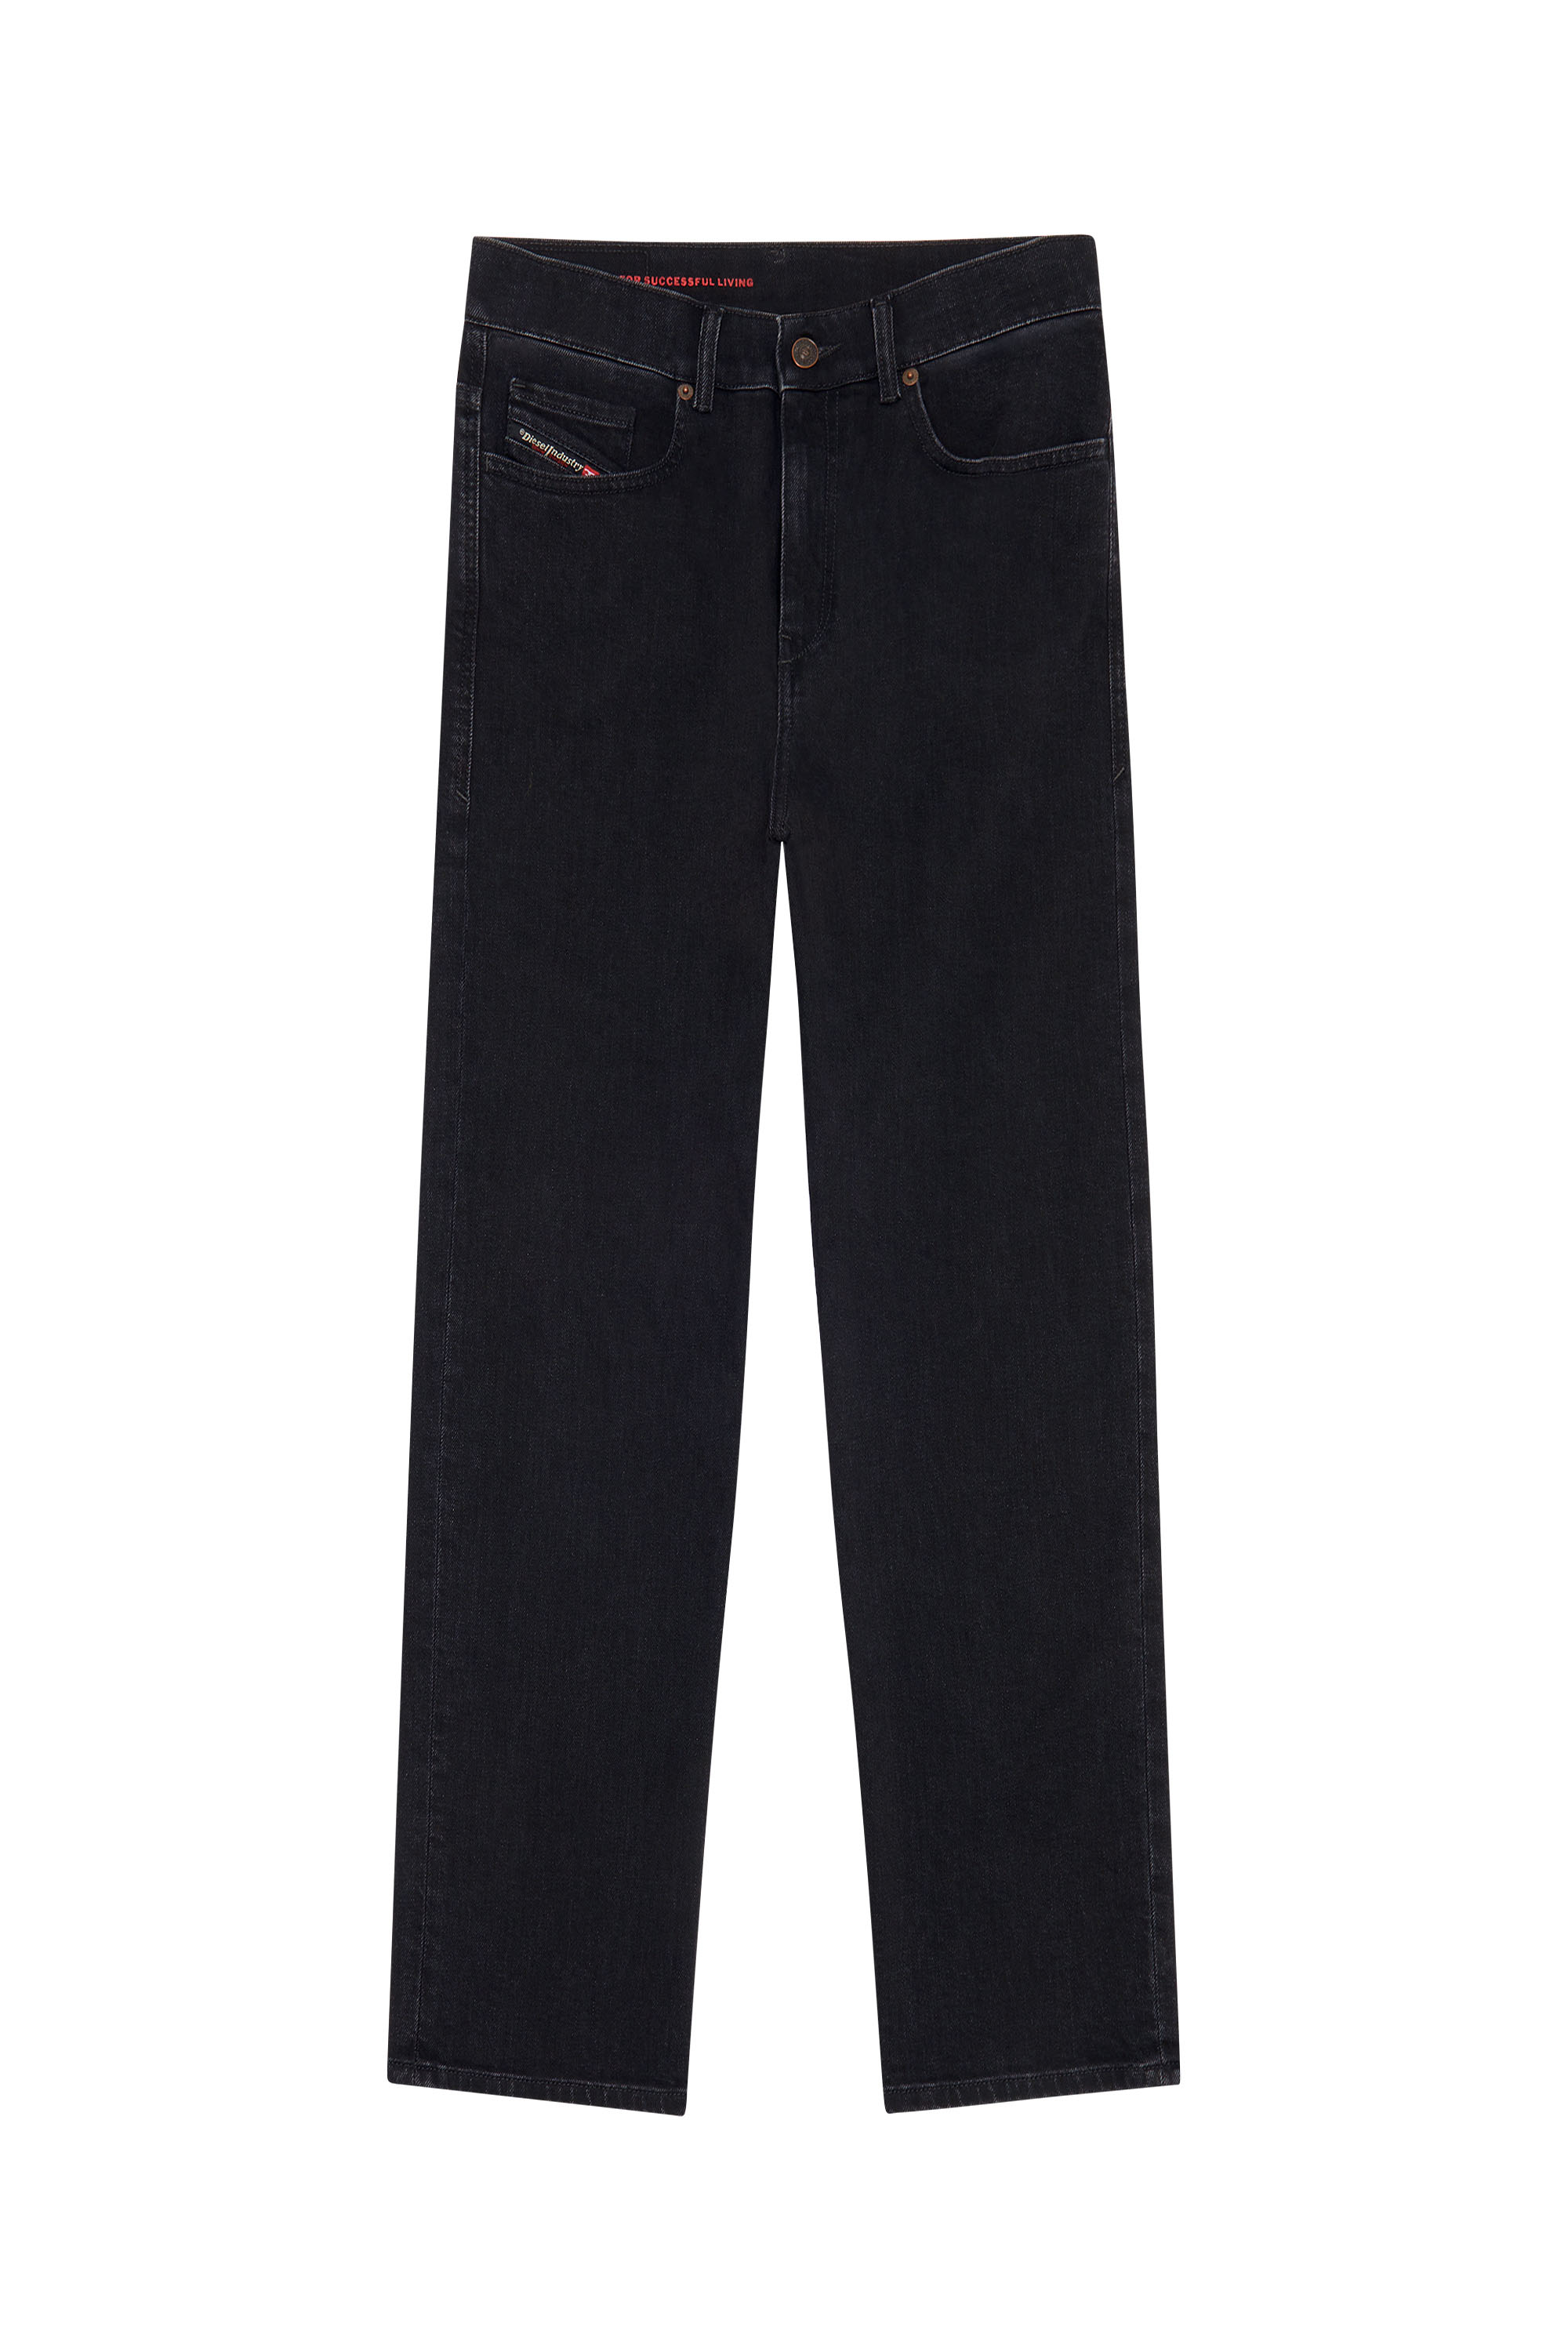 ATM Cotton Enzyme Wash Slim Pants in Black Womens Clothing Trousers Slacks and Chinos Capri and cropped trousers 